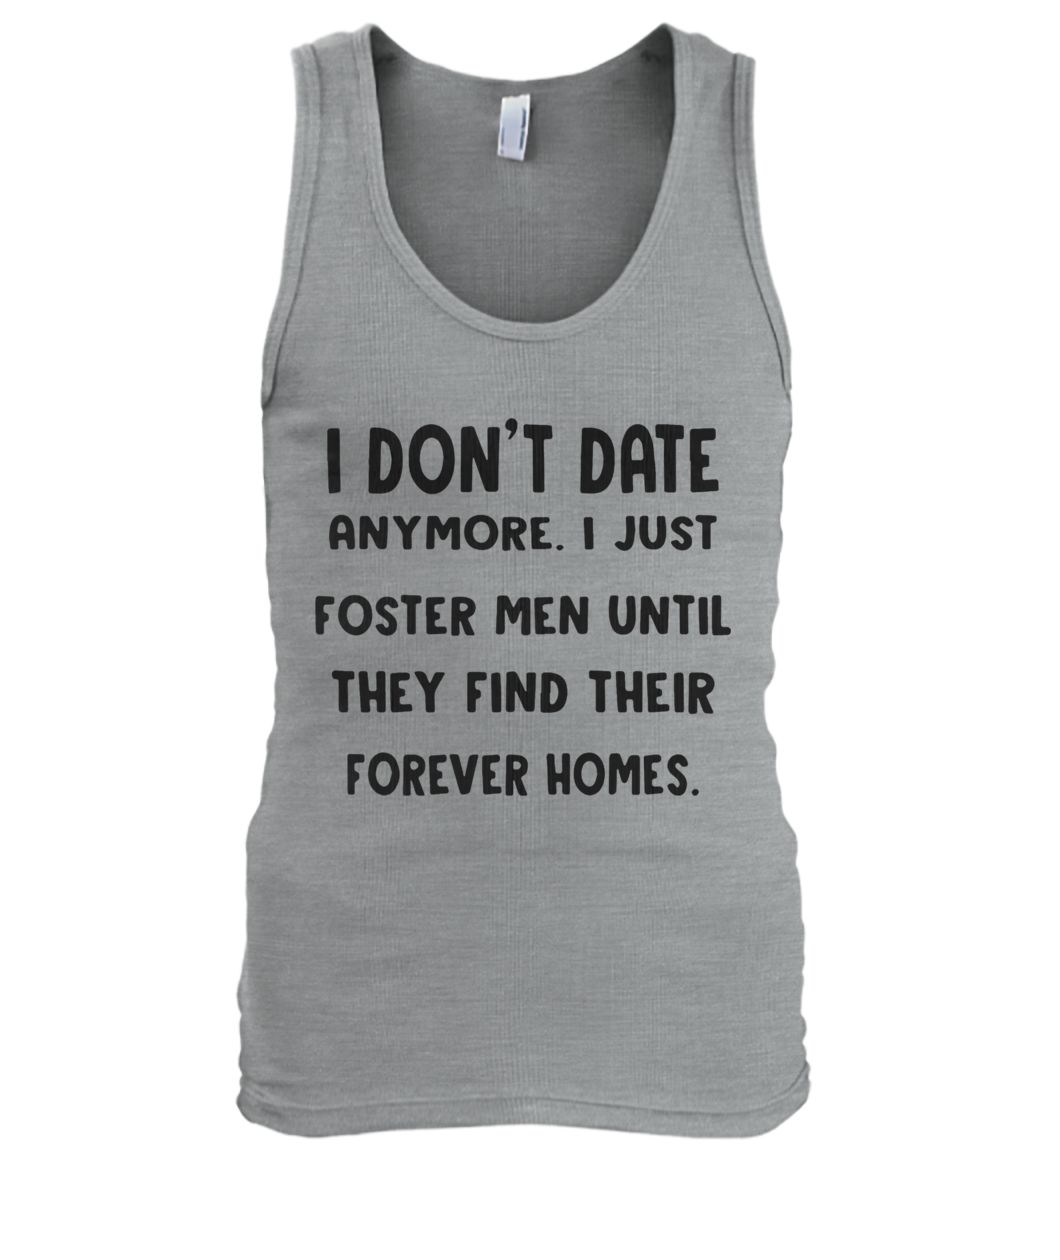 I don’t date anymore I just foster men until they find their forever homes men's tank top